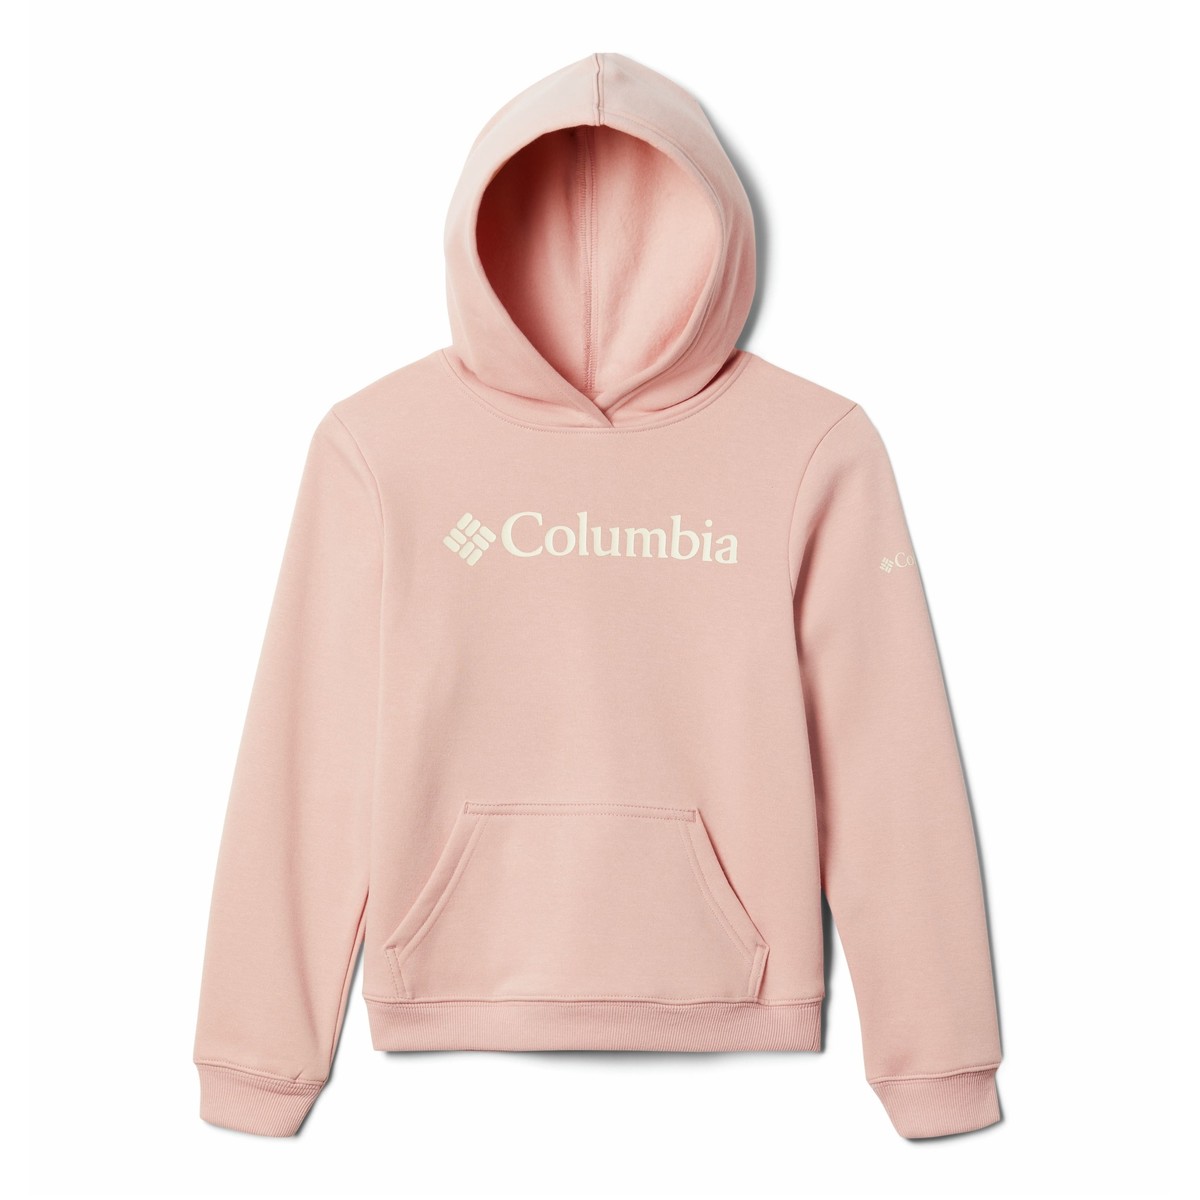 Columbia COLUMBIA TREK HOODIE Pink - Free delivery  Spartoo NET ! -  Clothing sweaters Child USD/$35.20